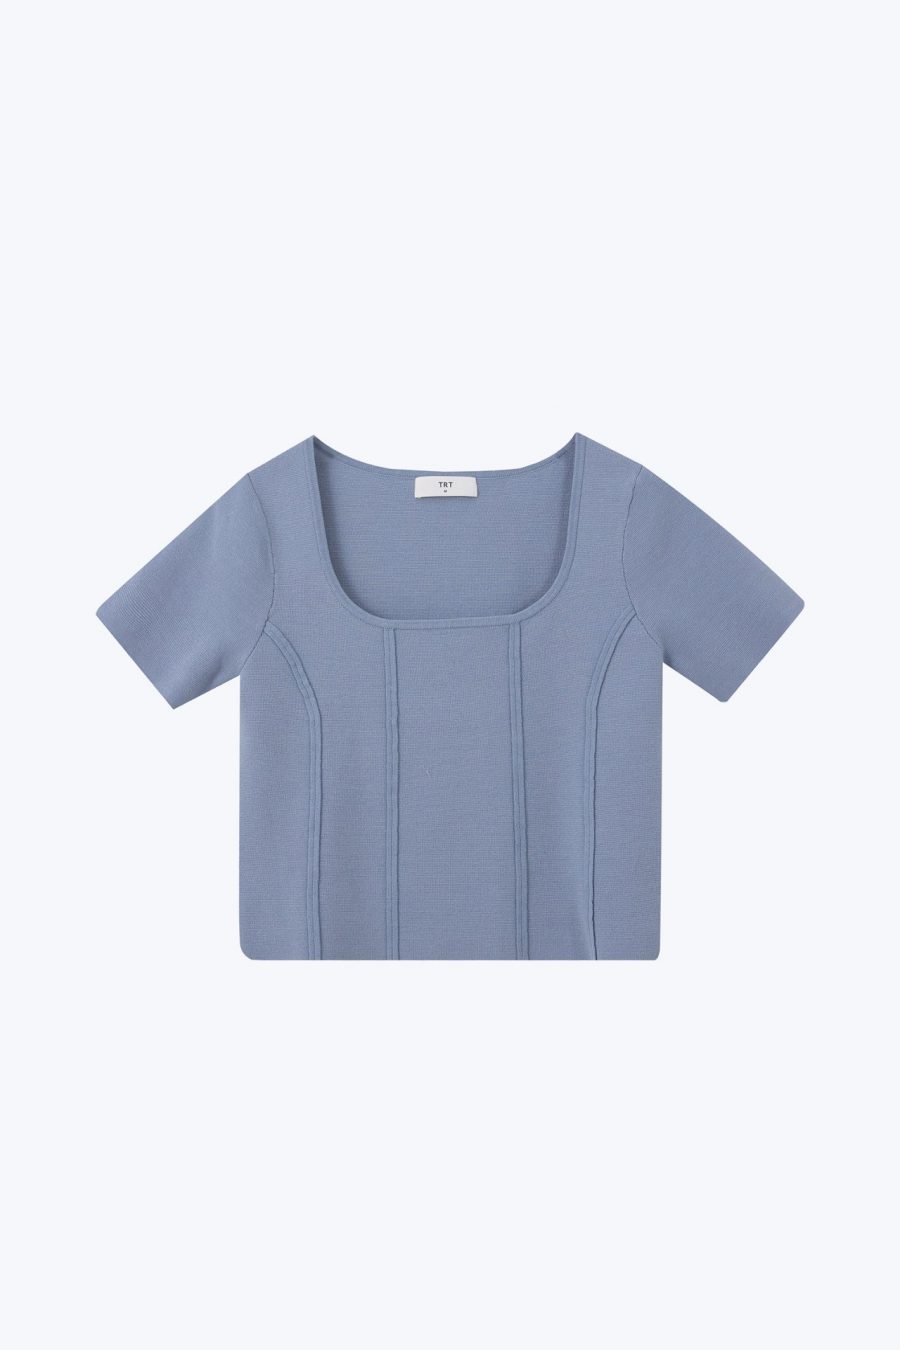 CK001180S Knitted Square Neck Top DUSTY BLUE